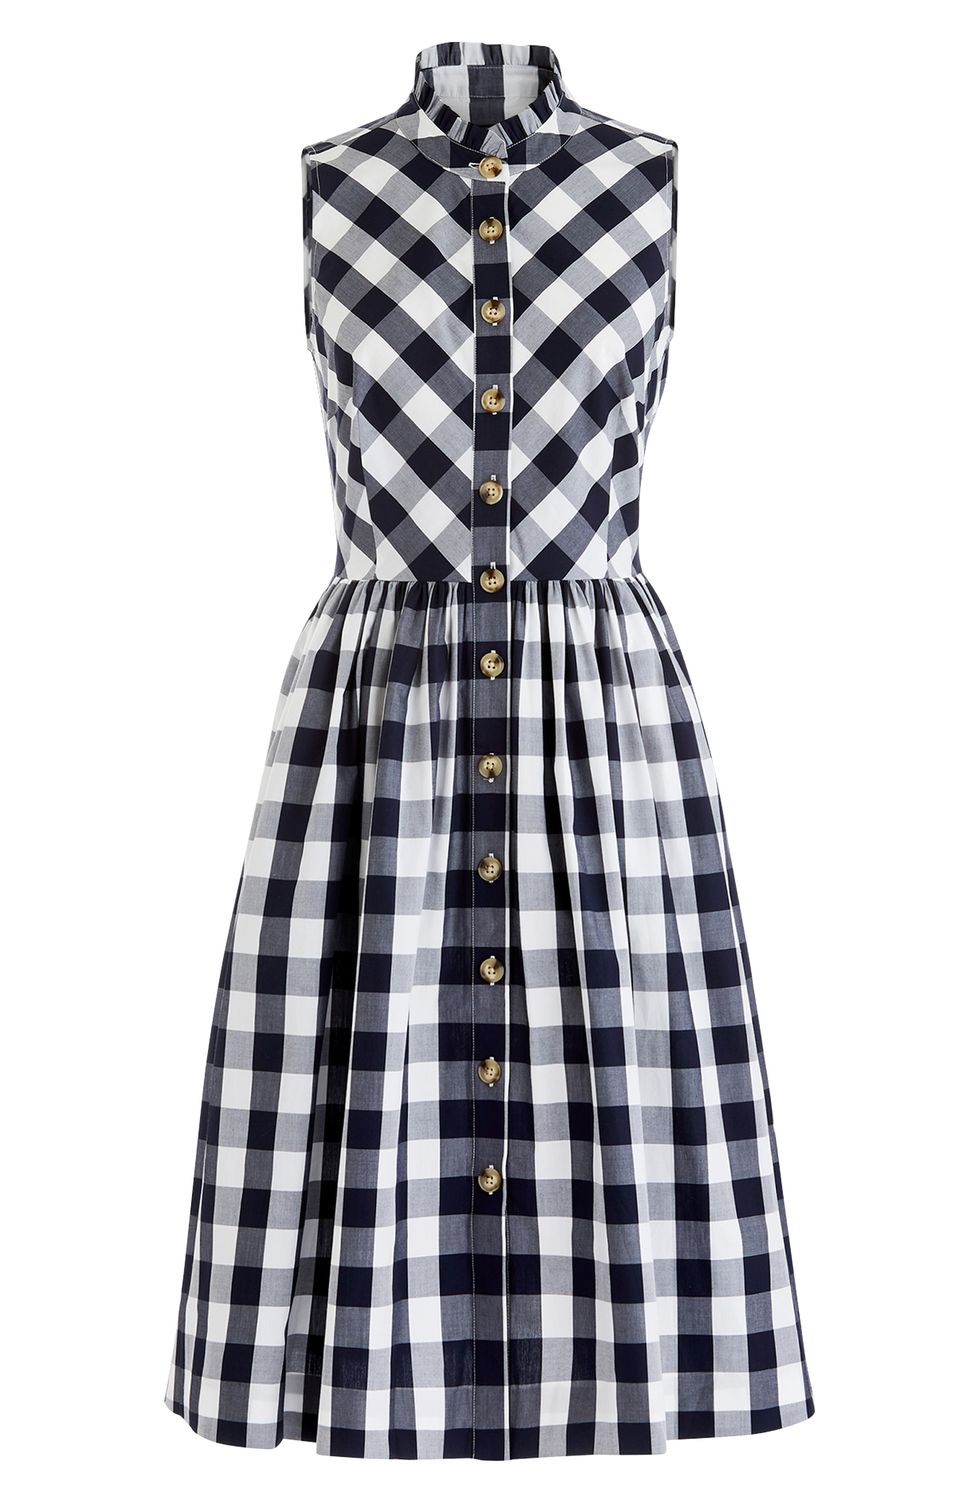 Preppy Dresses for Every Occasion - 20+ Chic Dresses for Preppy Women